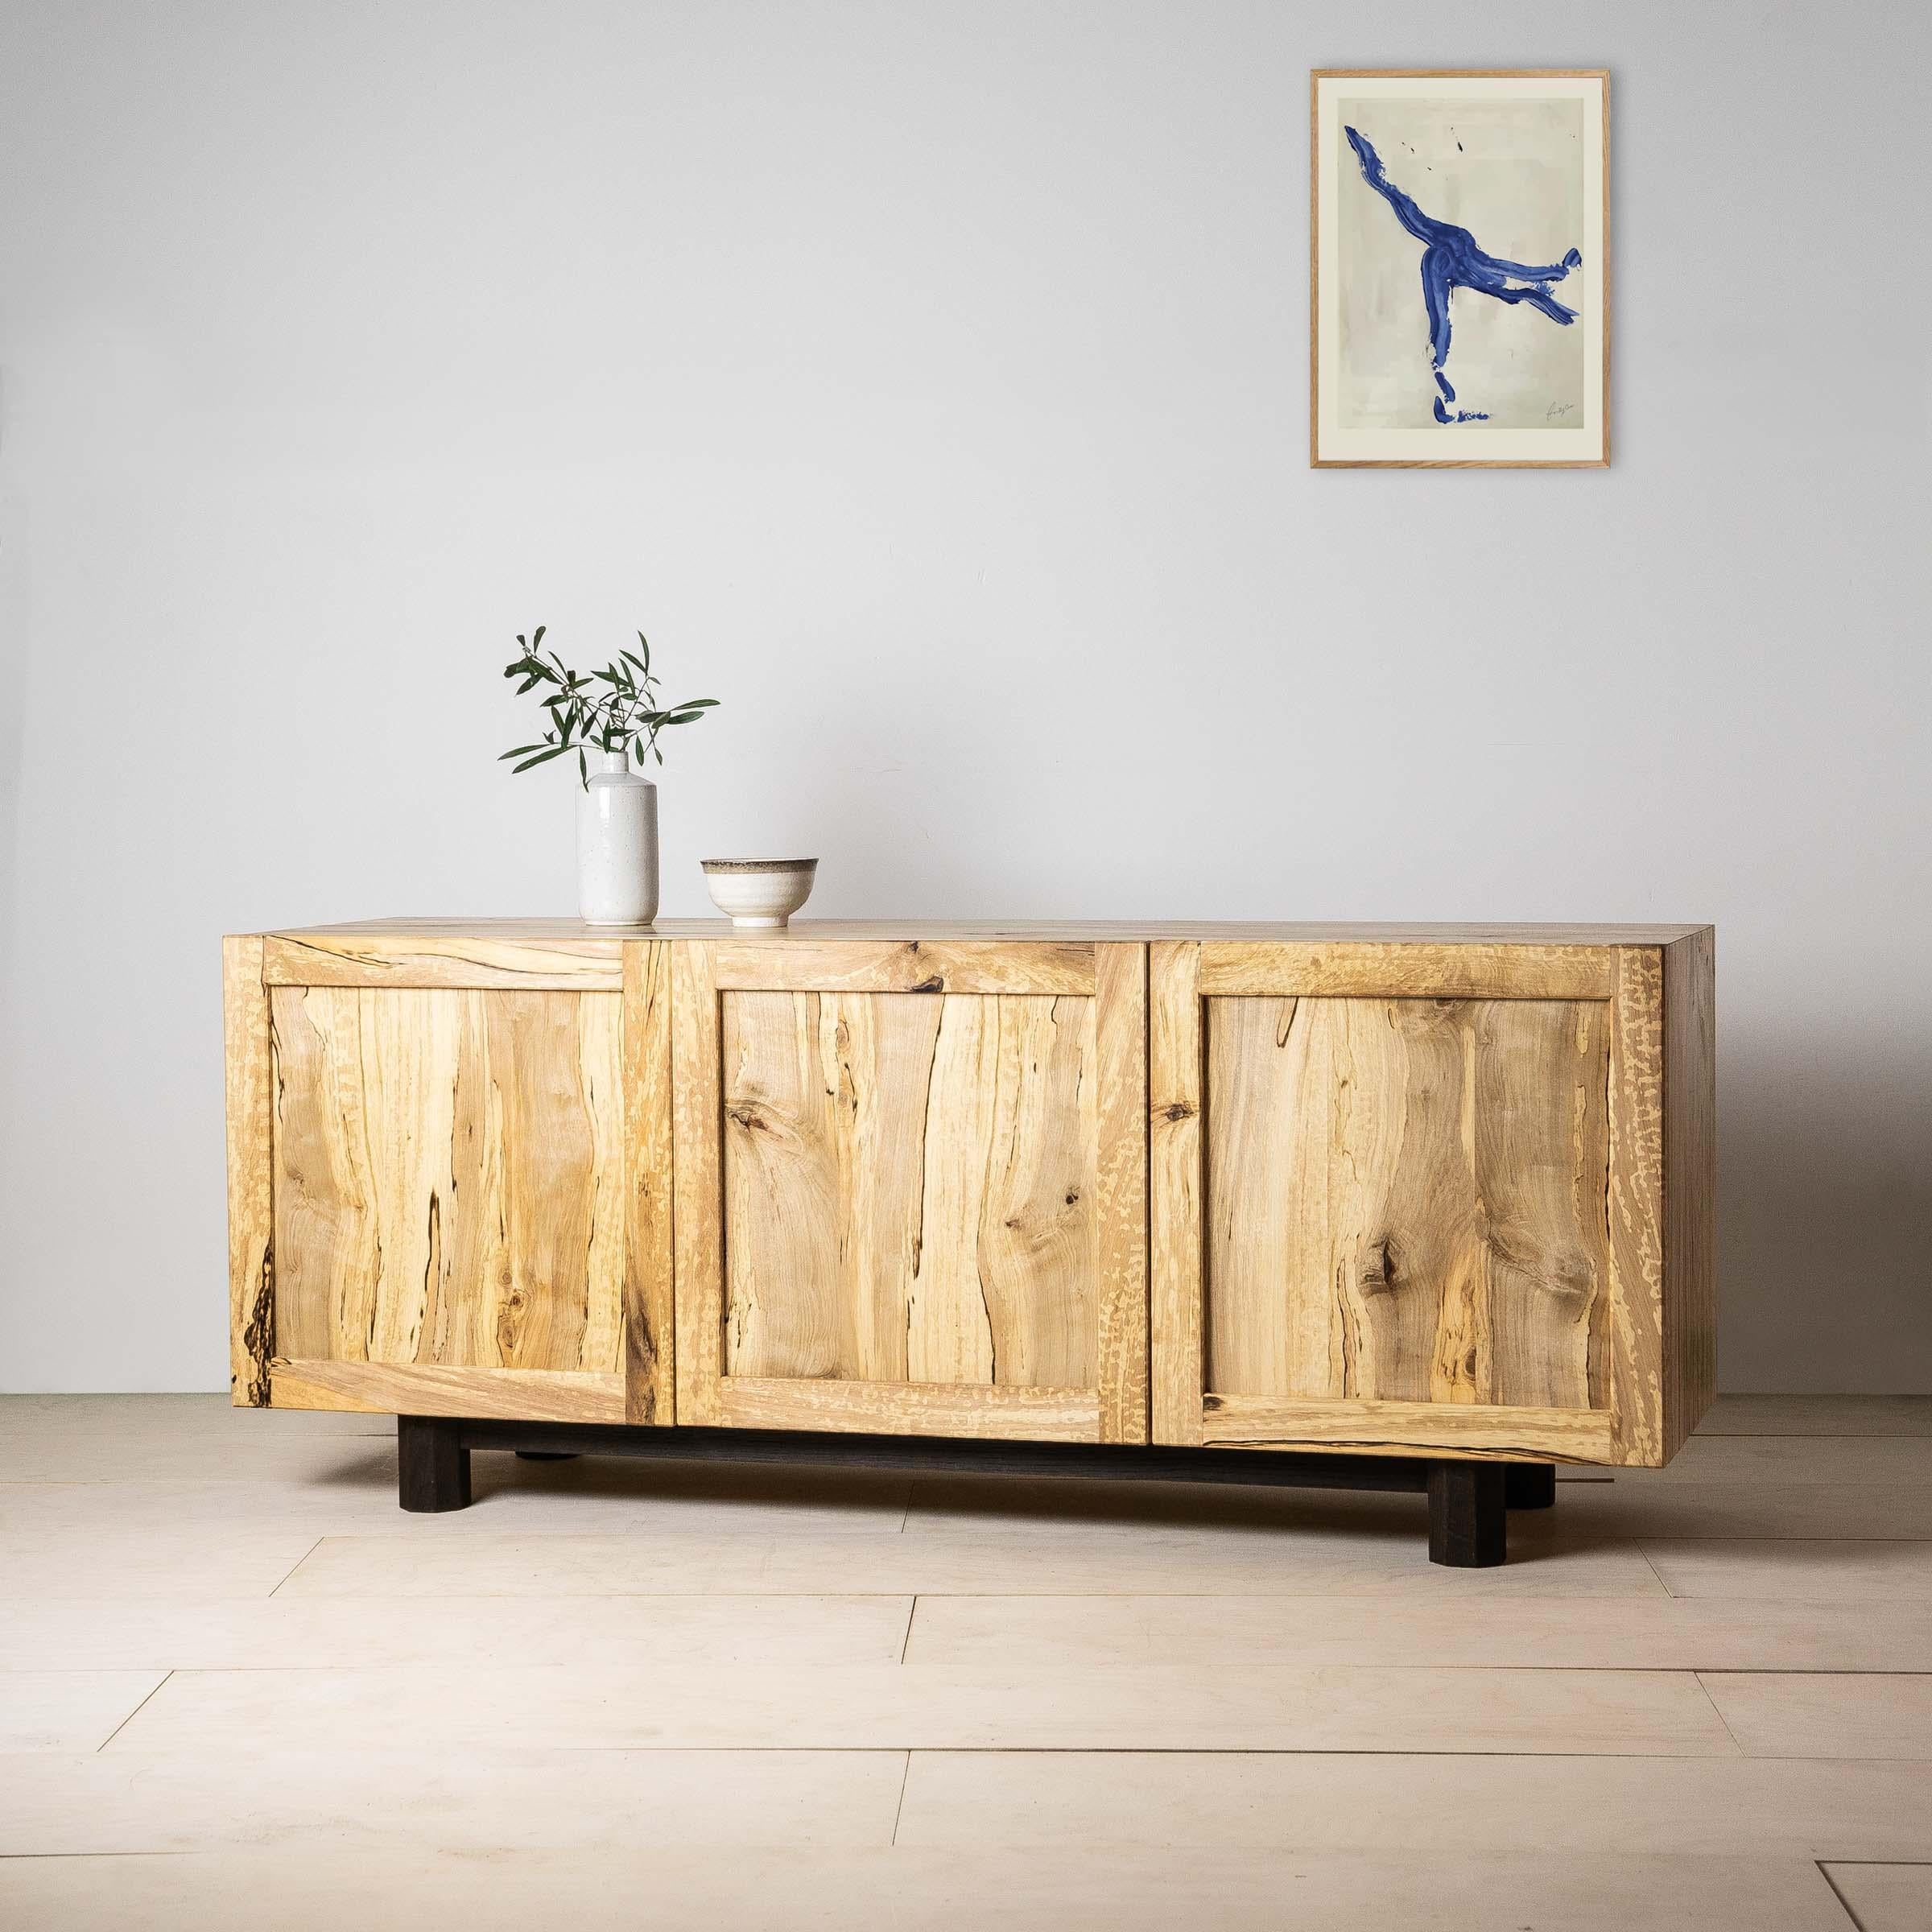 The Inari media cabinet is a celebration of spalted hornbeam, a rare native timber with intricate natural marbling formed by funghi penetrating the tree as it grew.

The cabinet features three drop-down doors with a panel and frame construction,